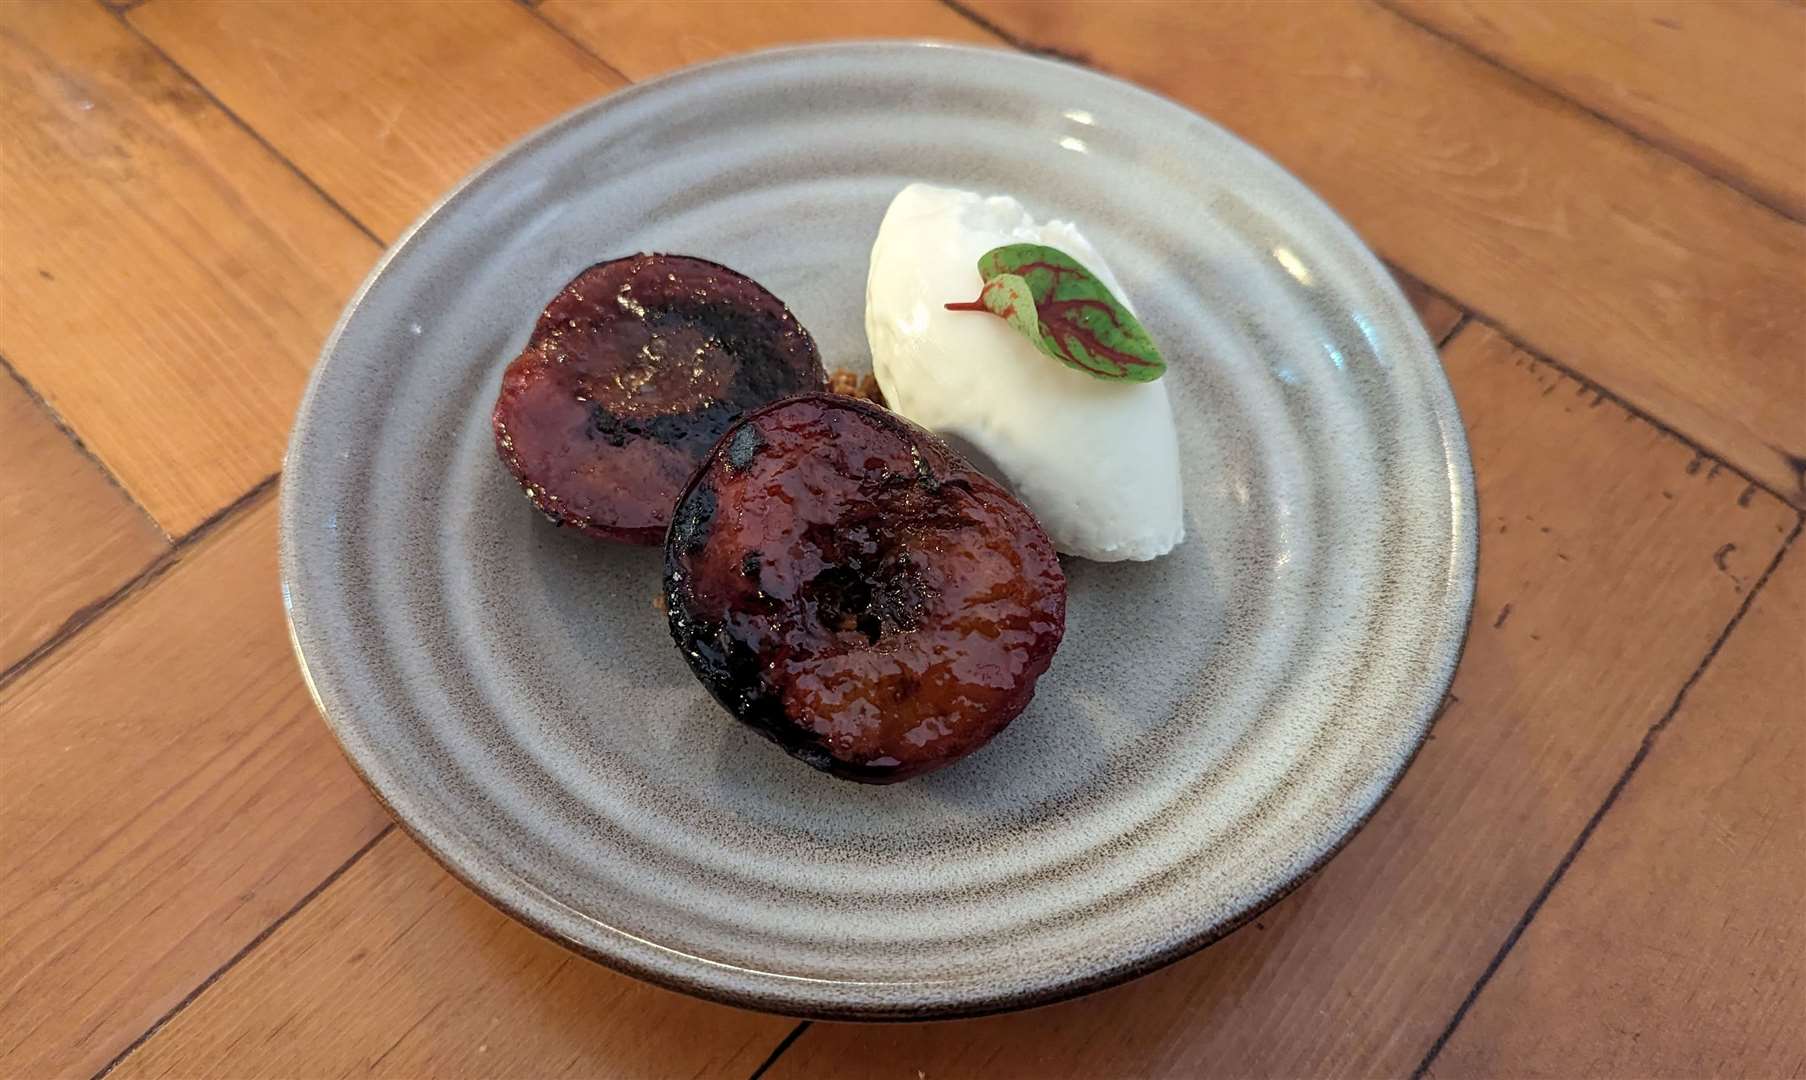 Grilled plums with vanilla ice cream